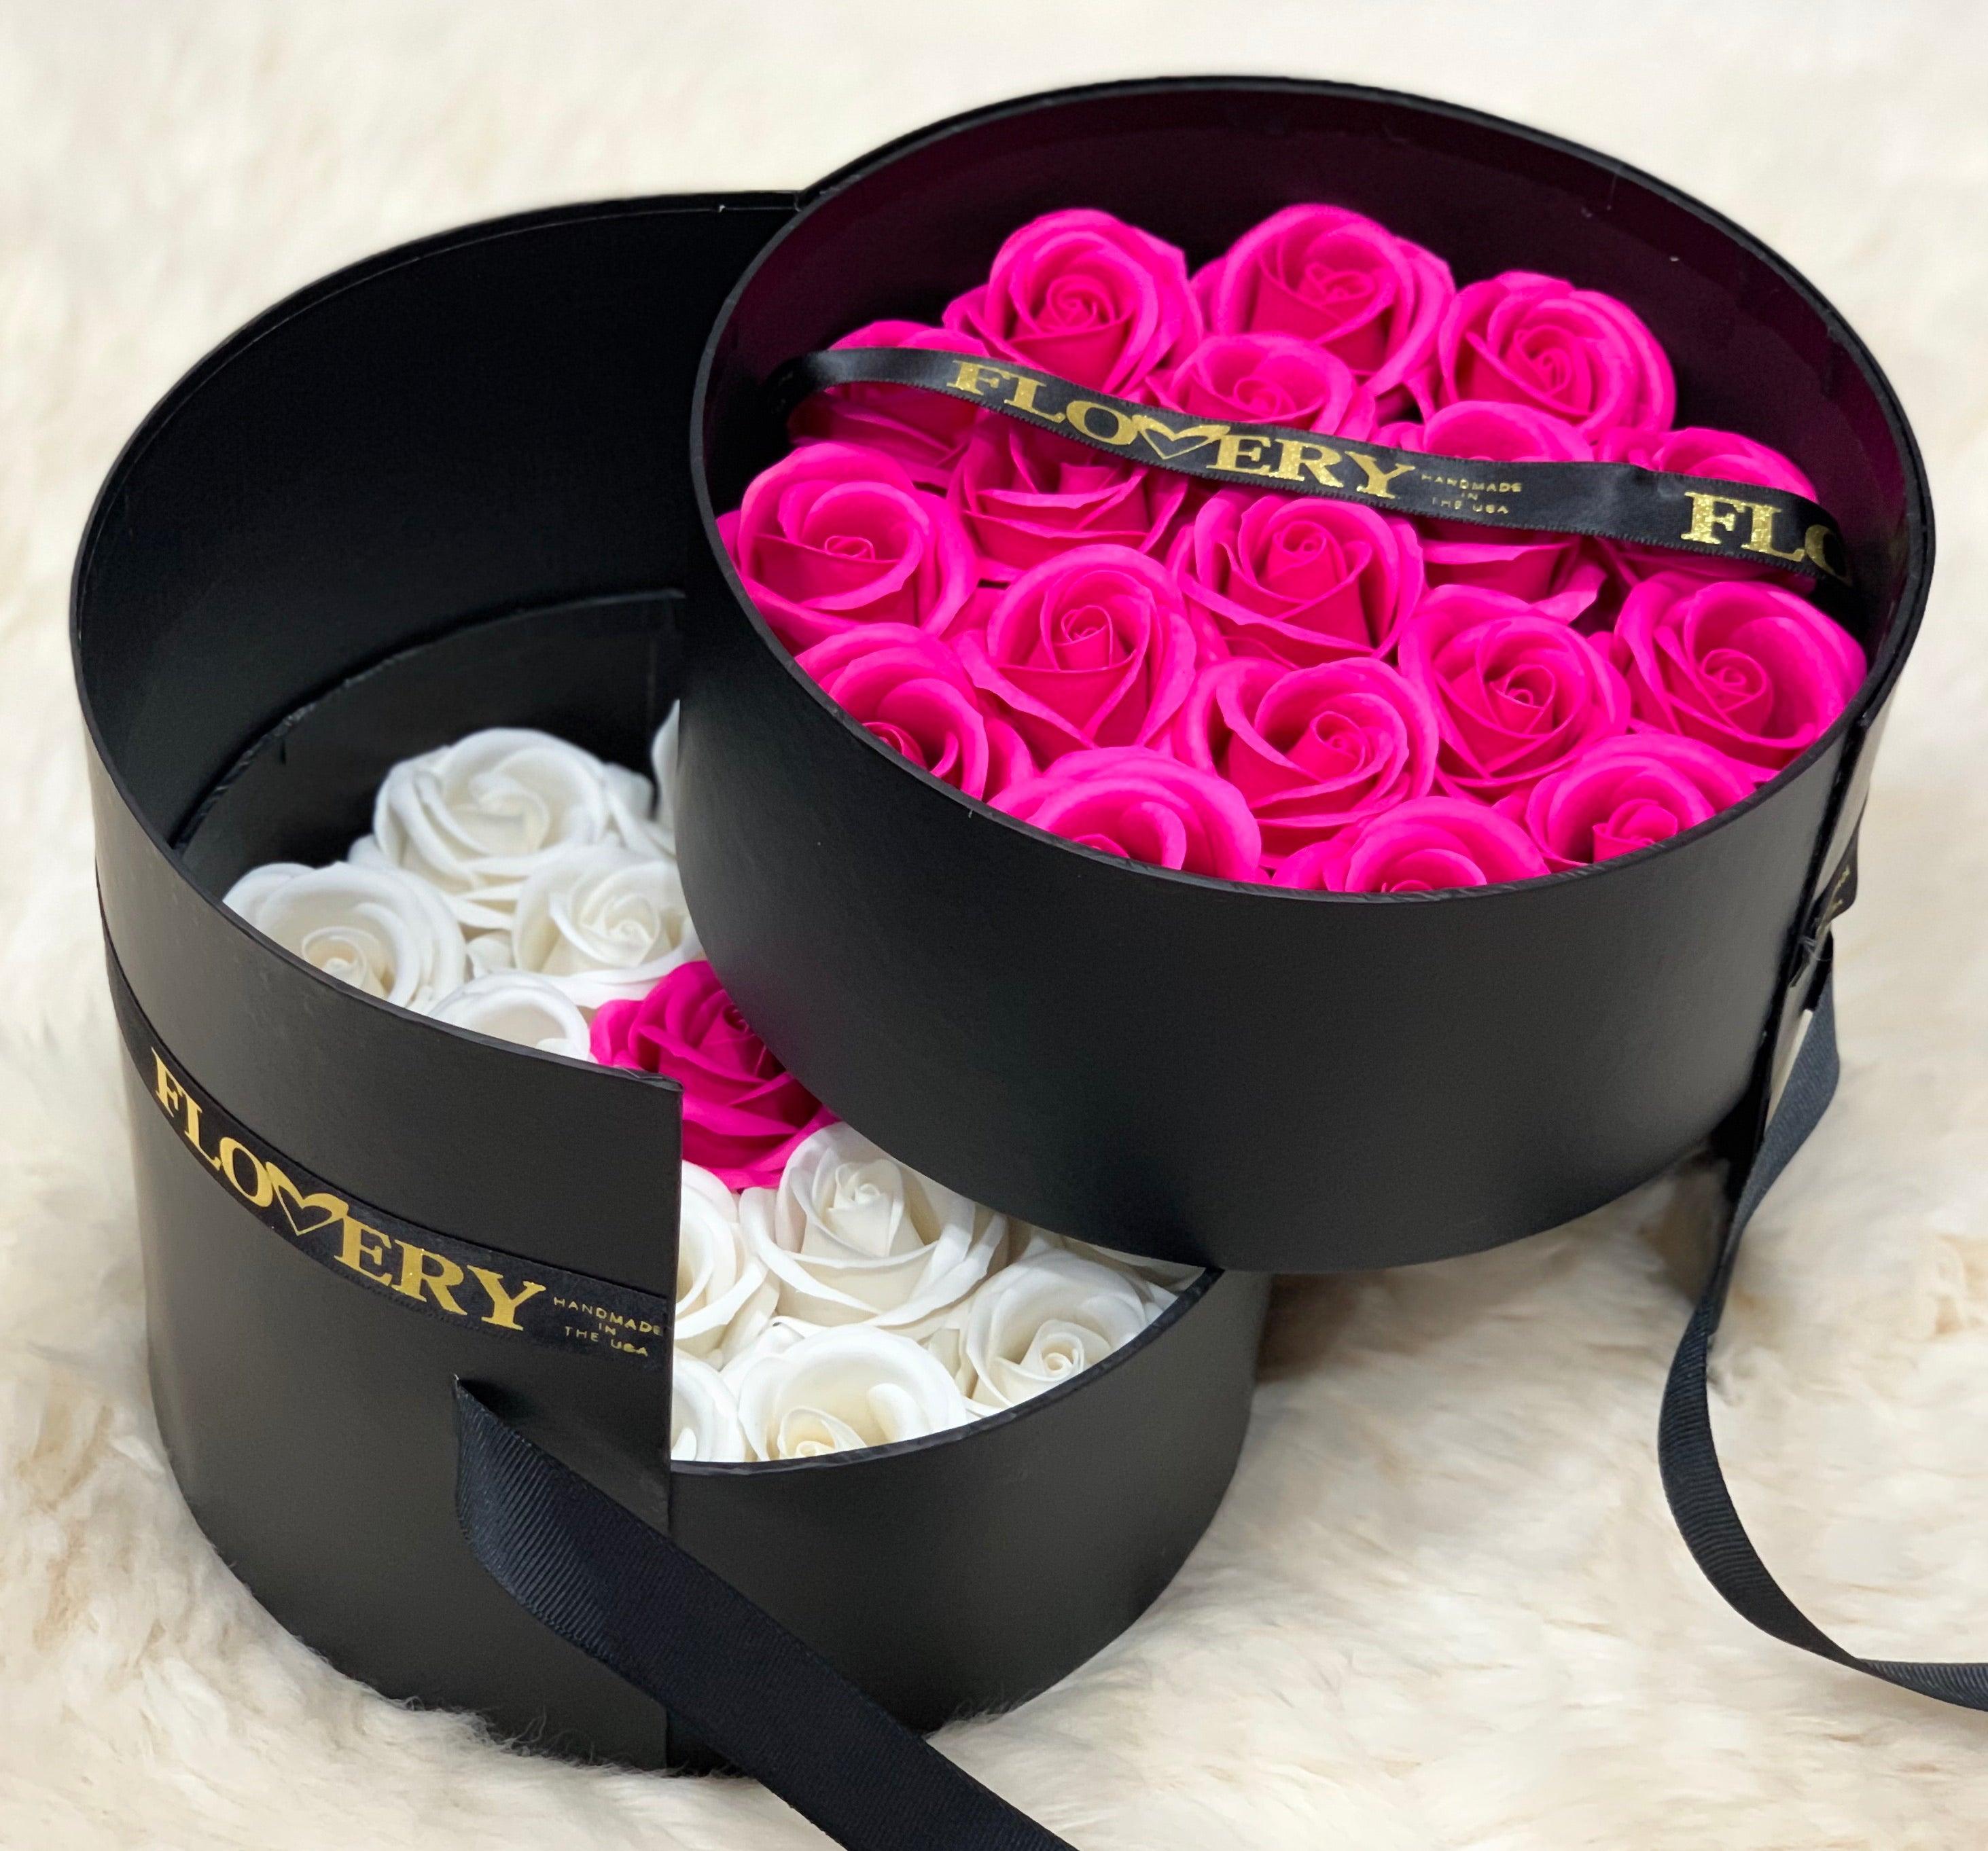 Scented Soap Mixed Hot Pink and White Rose In Elegant Double Gift Box - Flovery